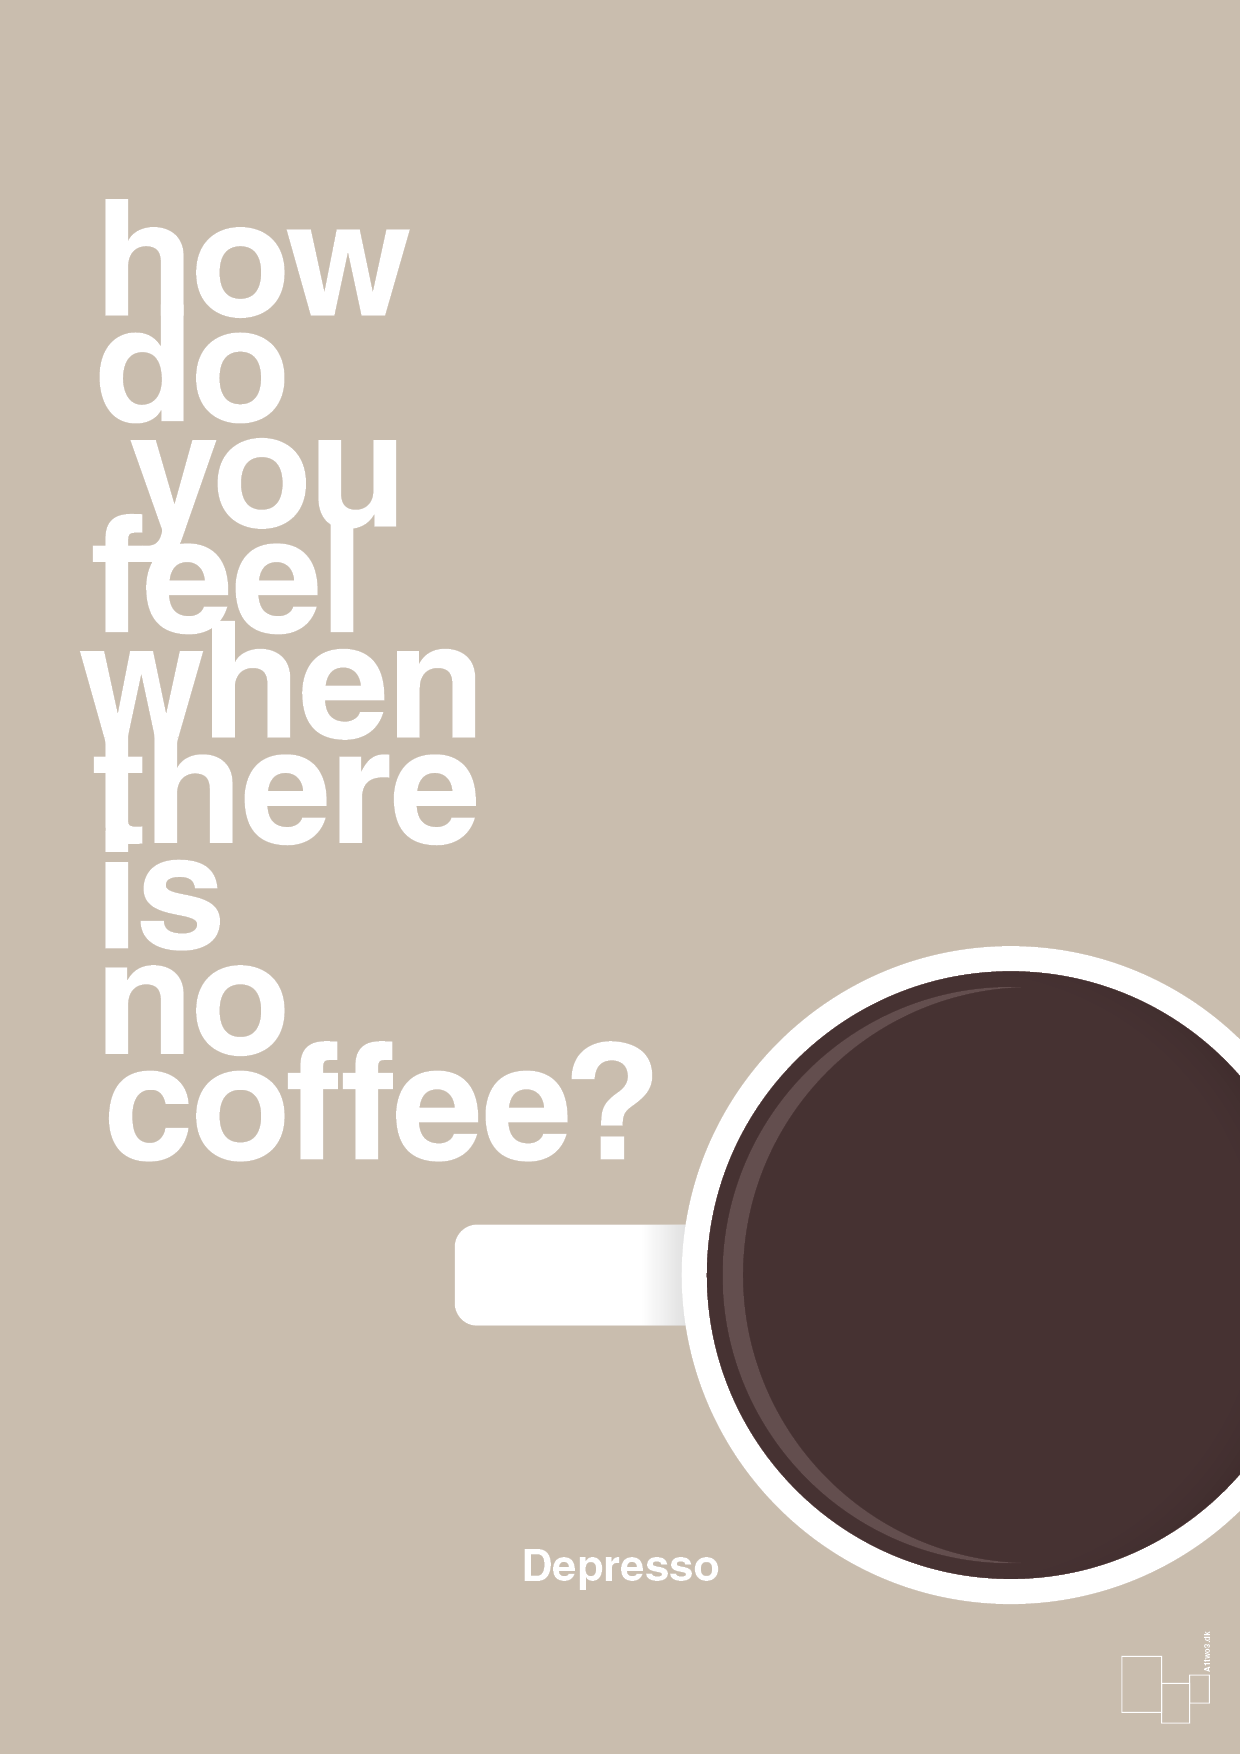 how do you feel when there is no coffee? depresso - Plakat med Mad & Drikke i Creamy Mushroom